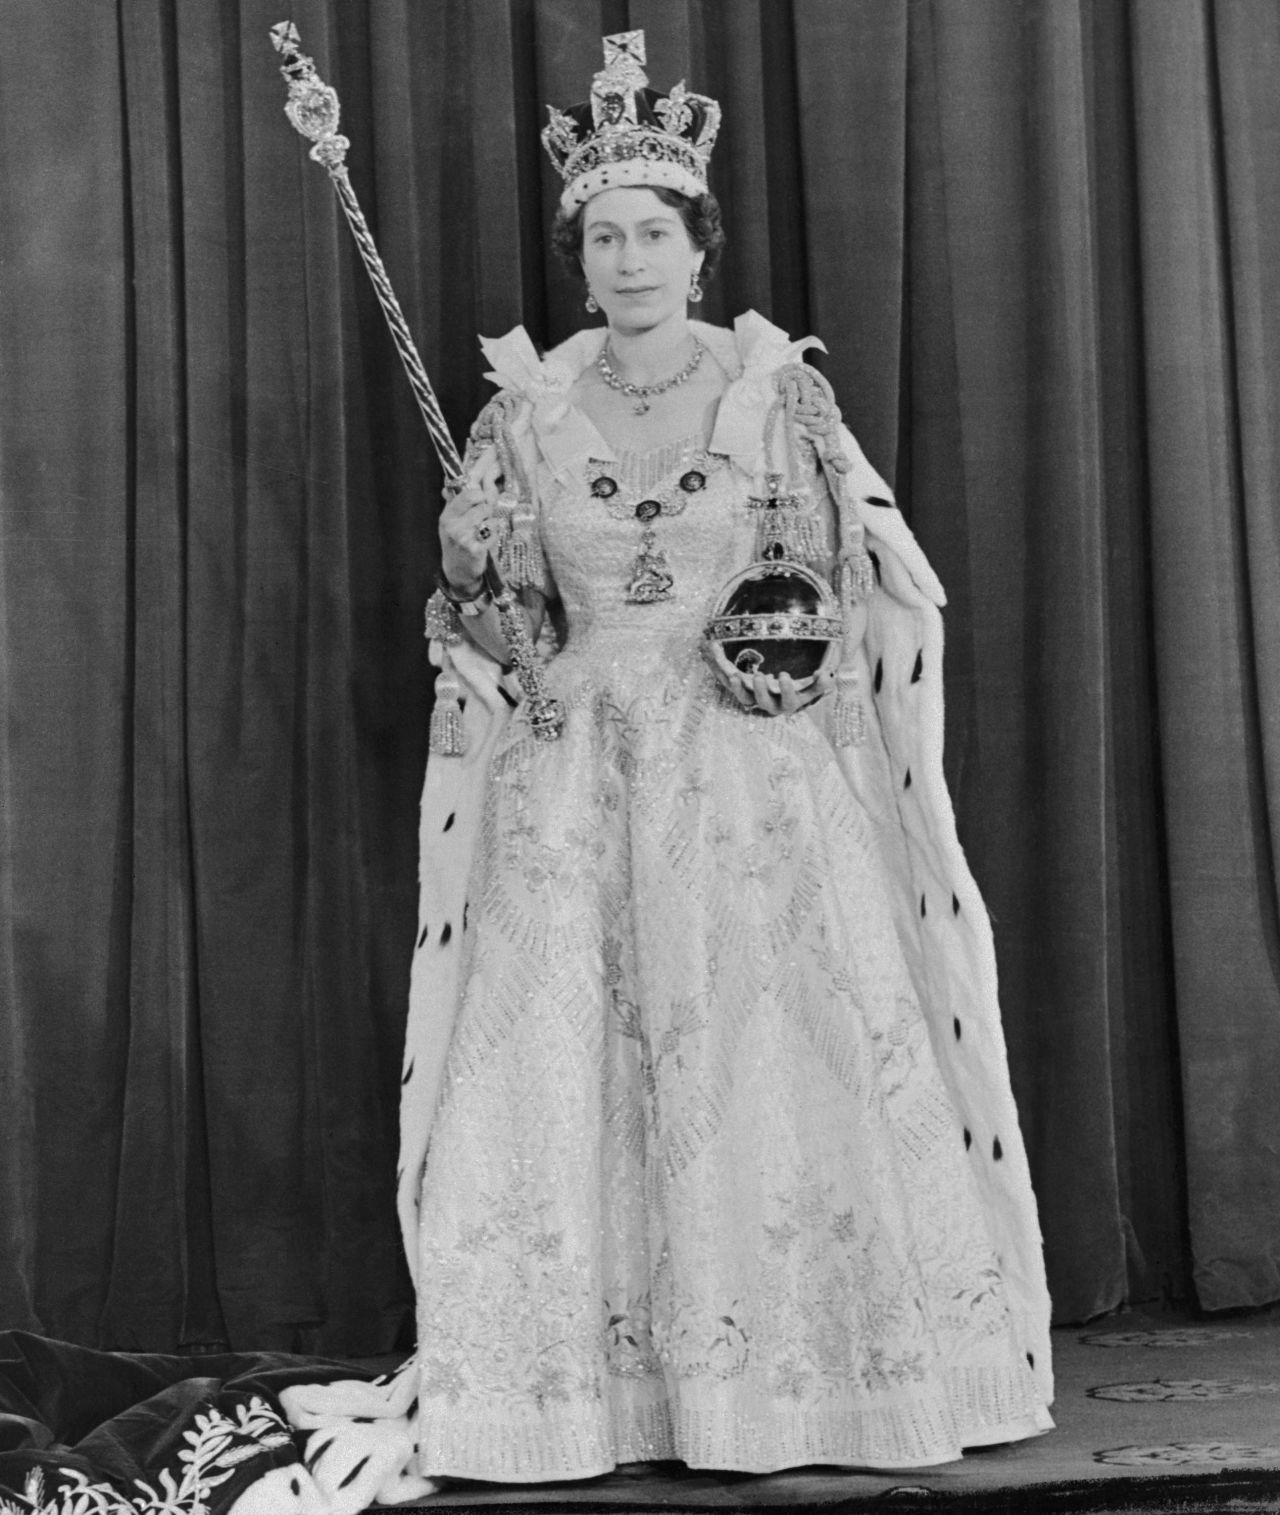 The Queen after her coronation.